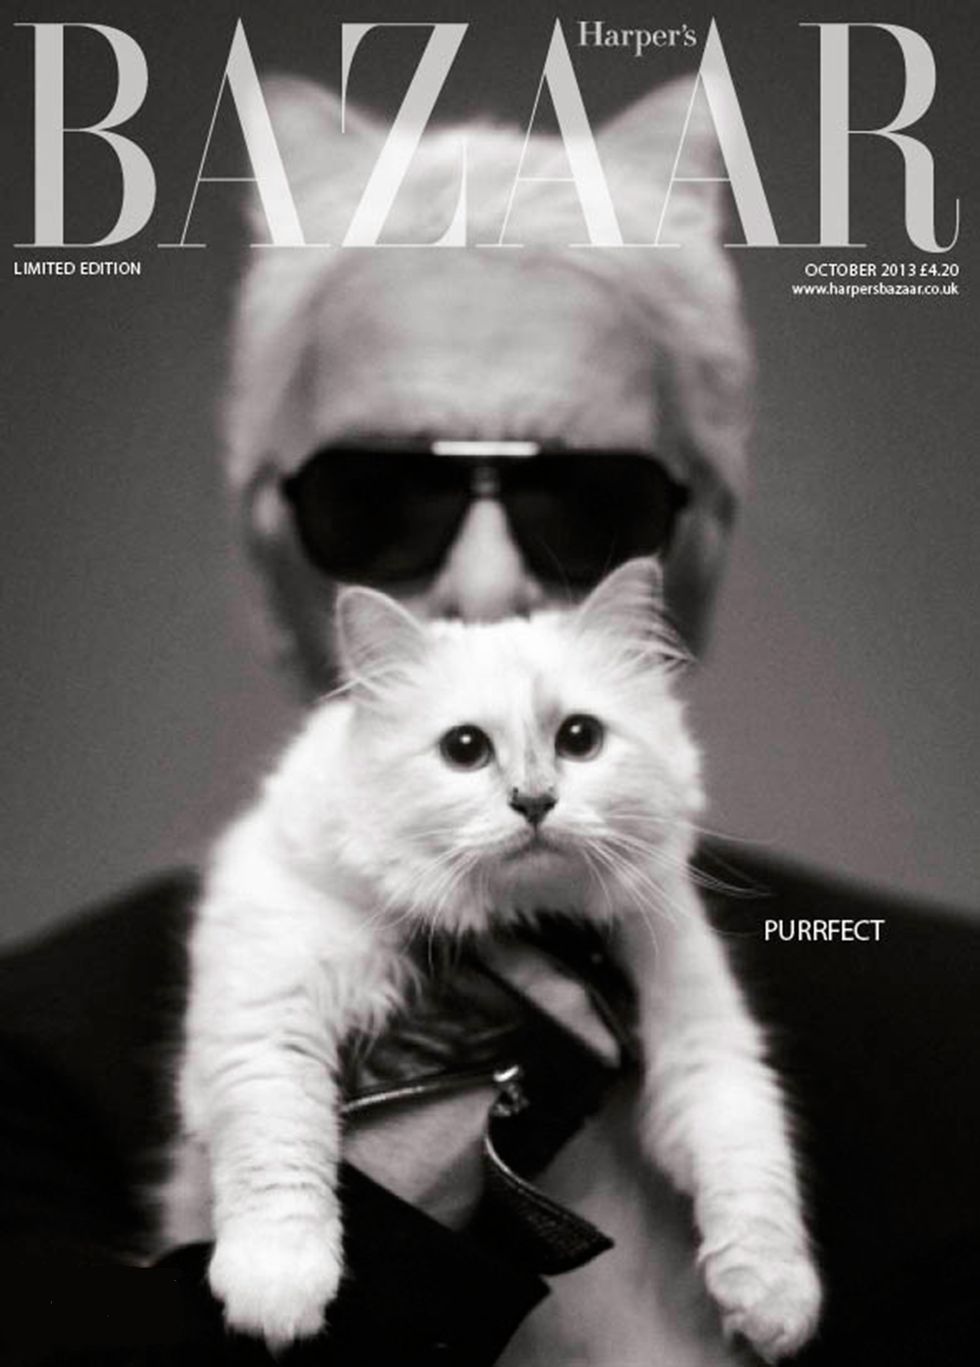 Louis Vuitton on X: What did Choupette whisper to Karl Lagerfeld